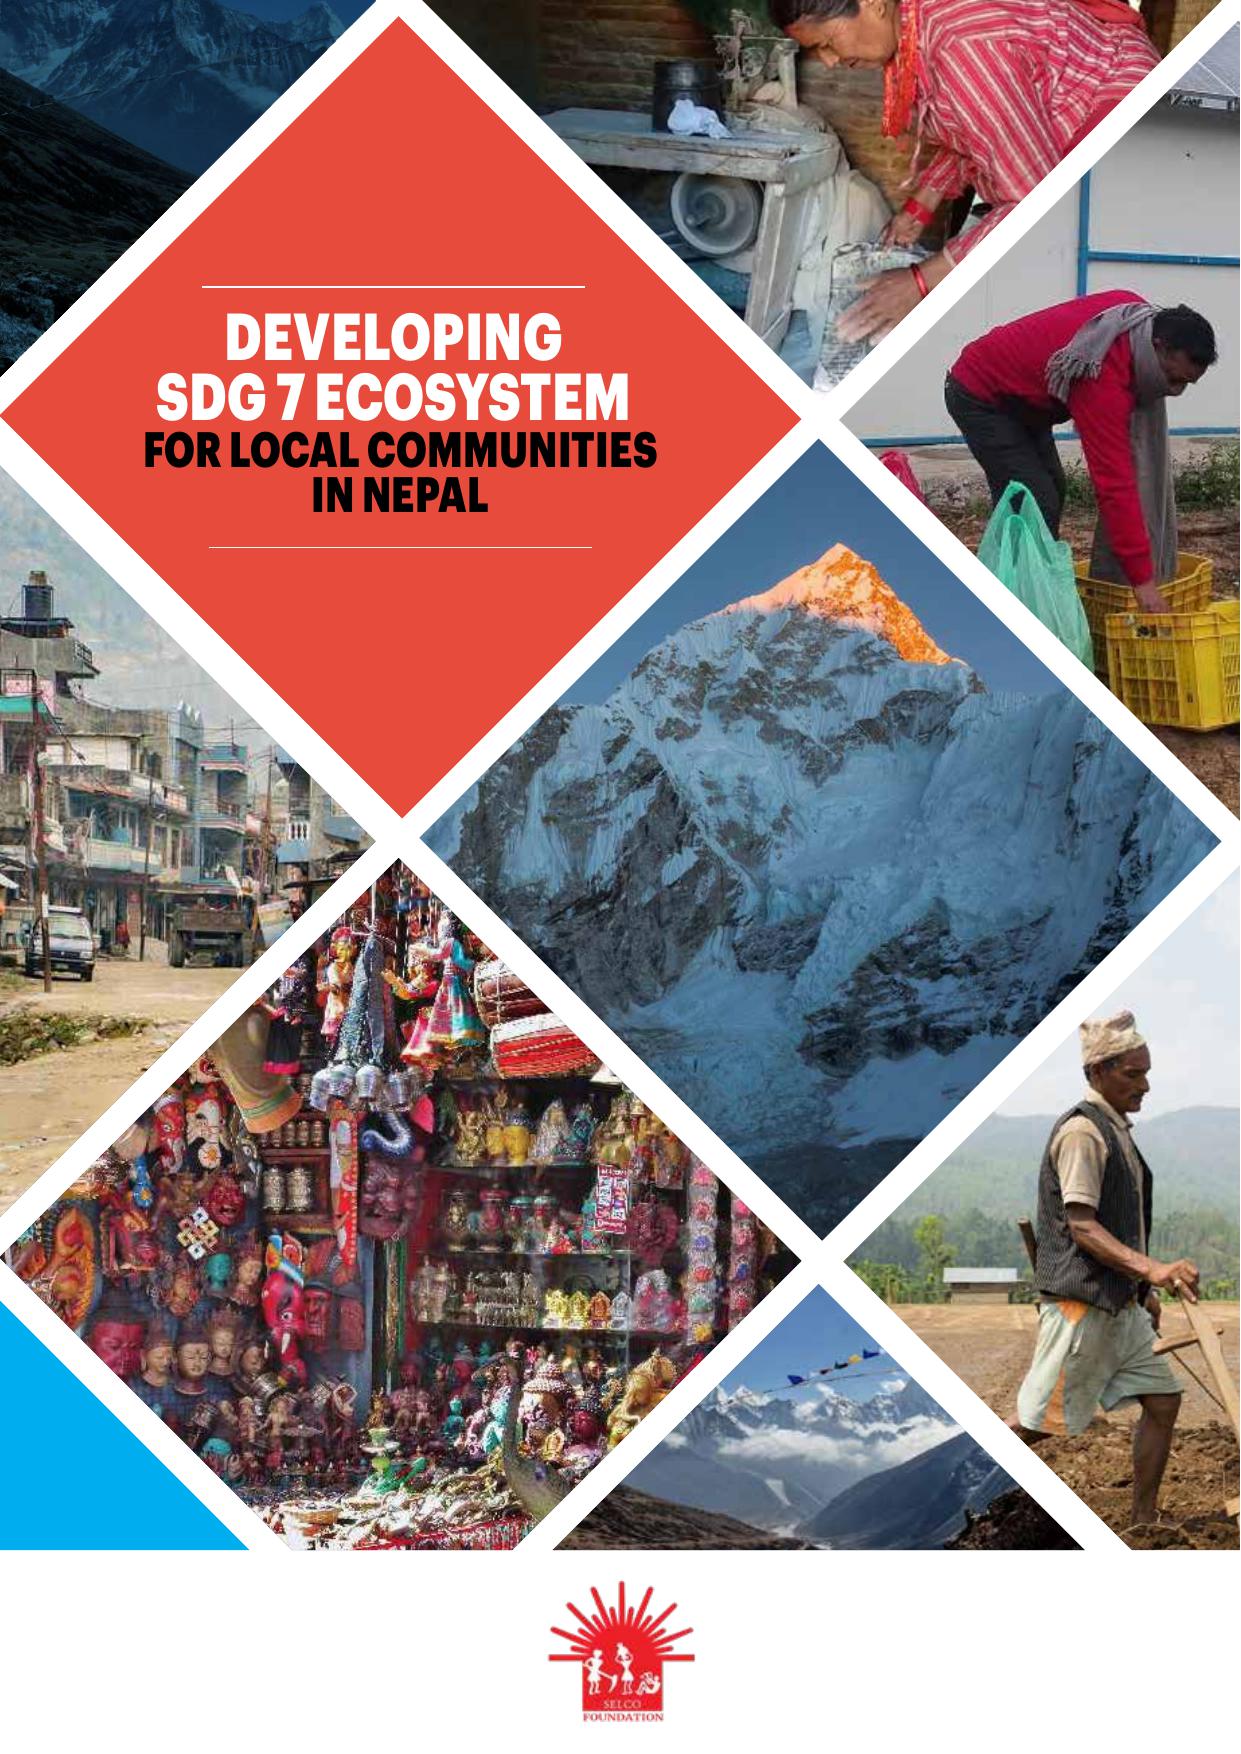 Developing SDG 7 ecosystem for local communities in Nepal